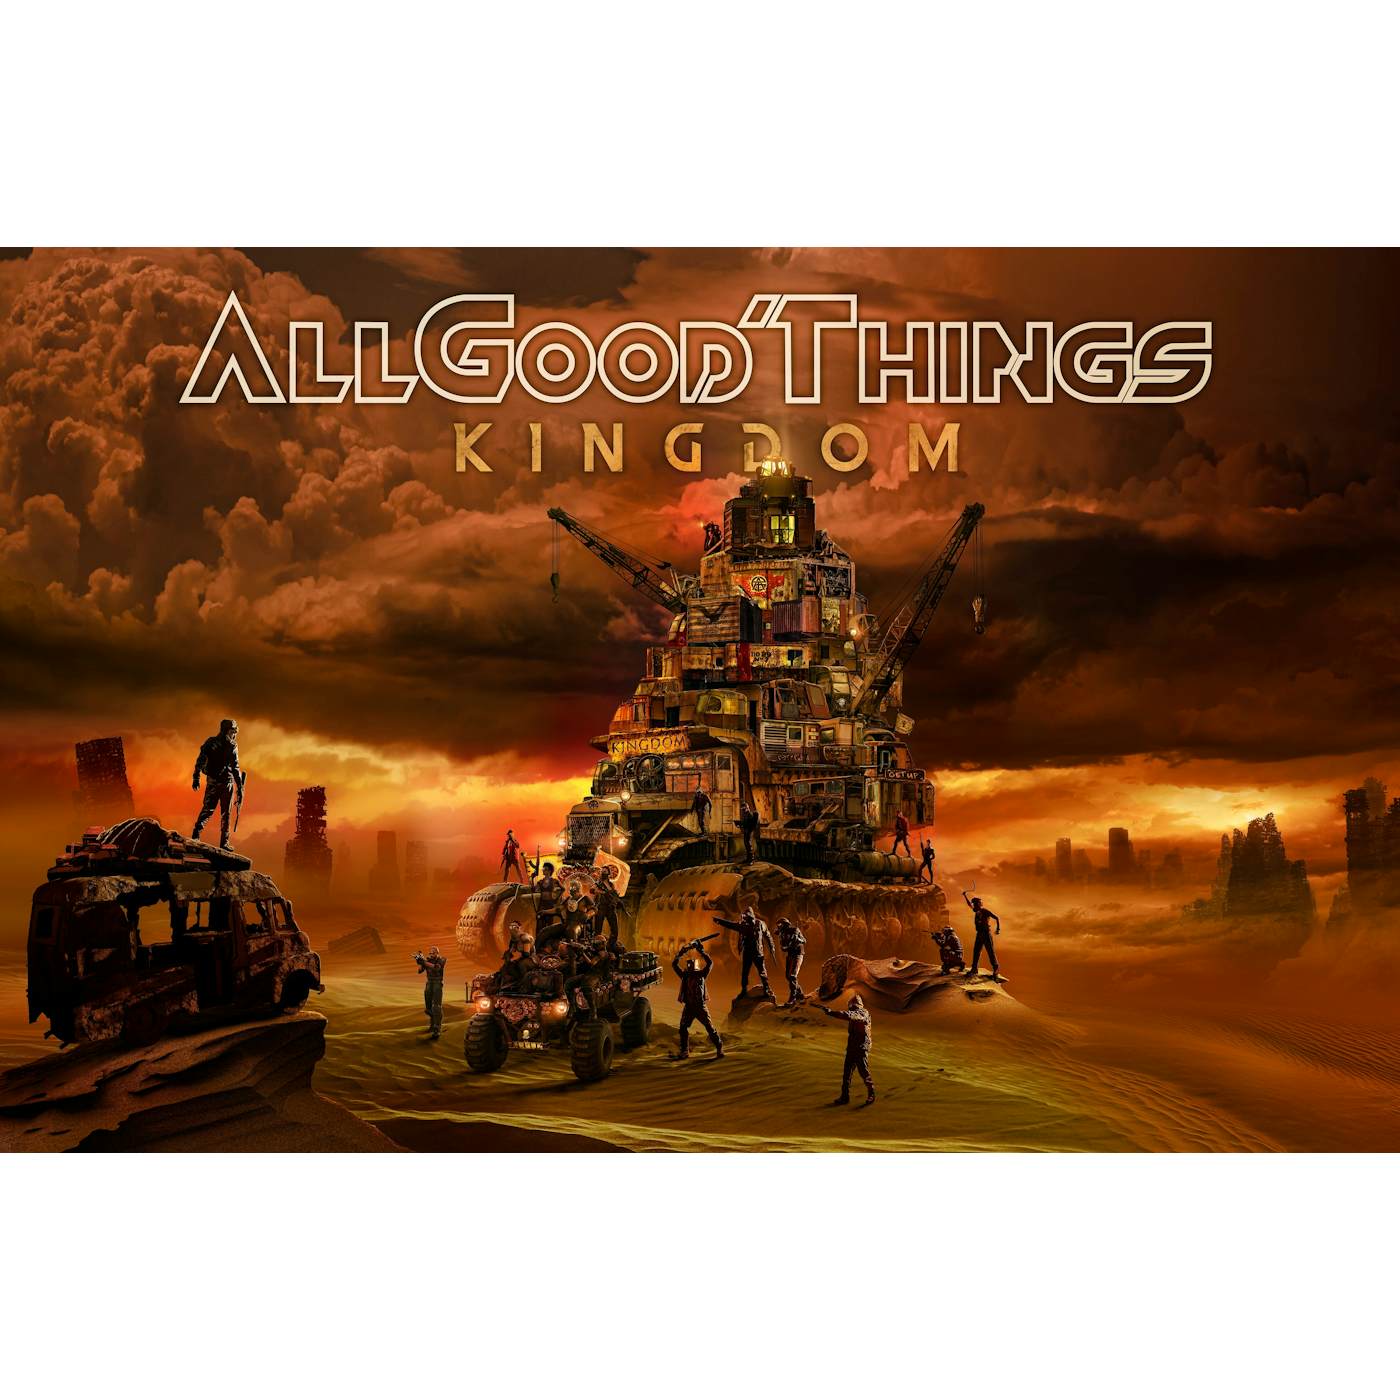 ALL GOOD THINGS - "KINGDOM" POSTER **SIGNED**